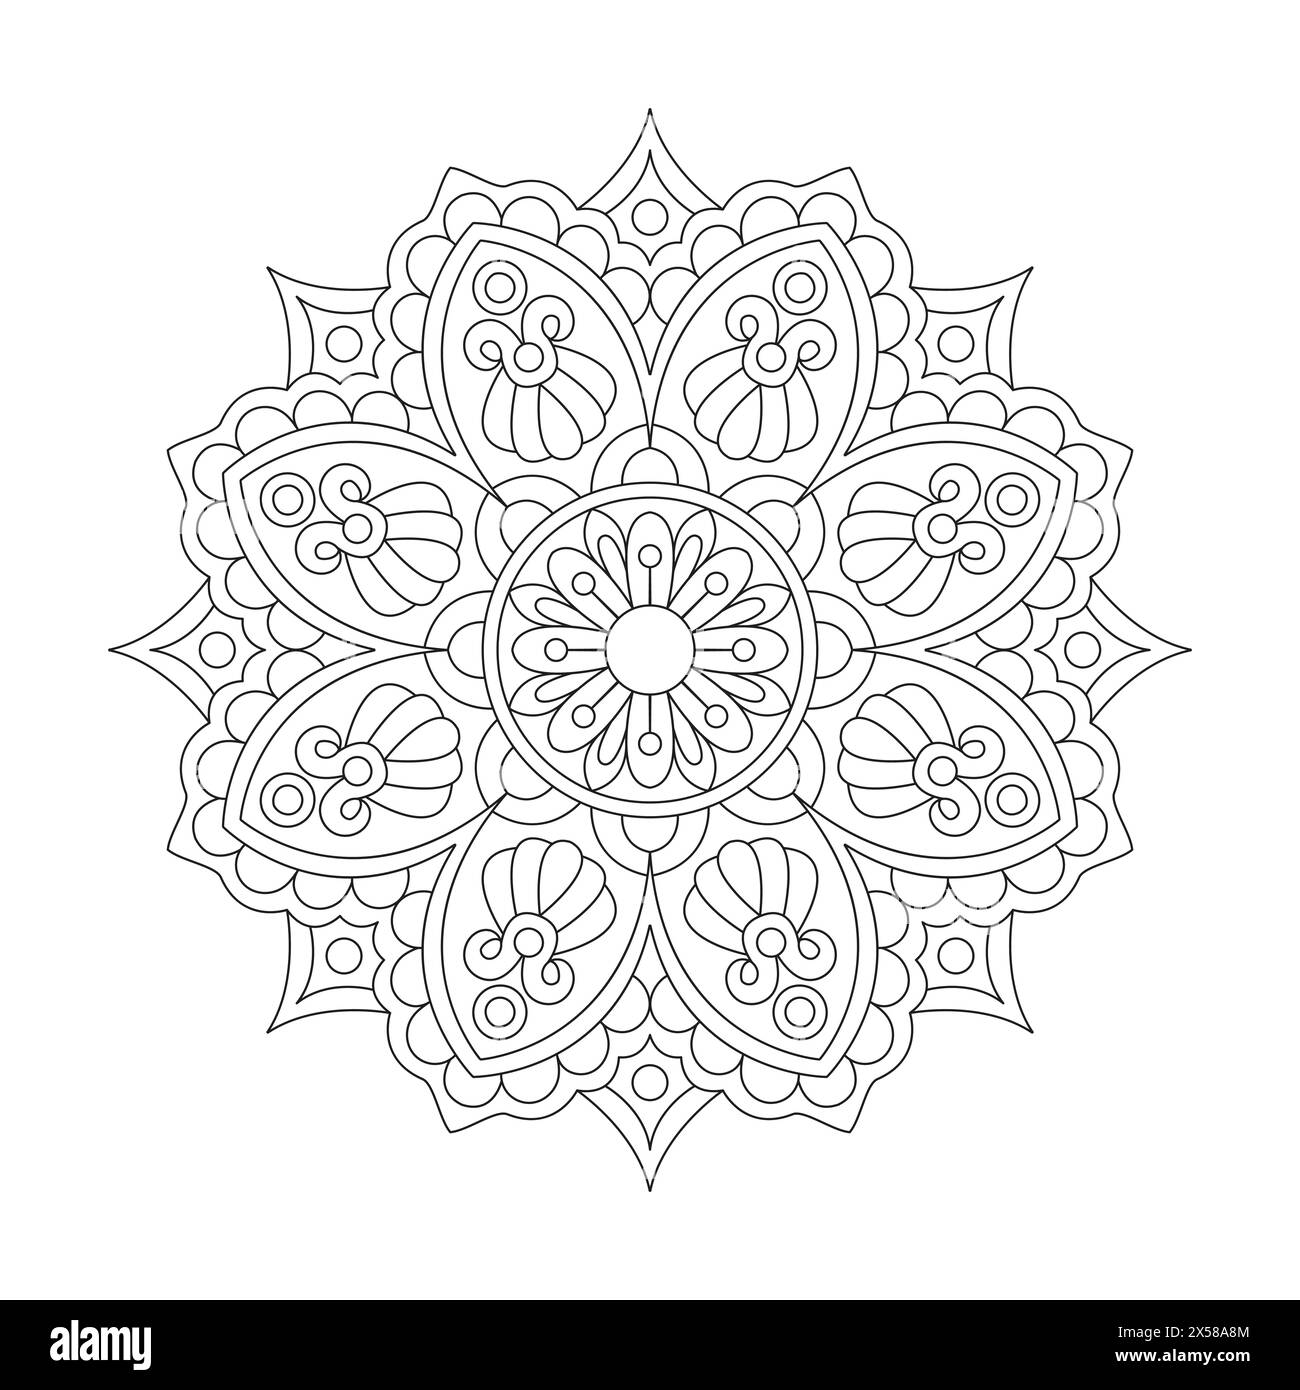 Zen Zenith Mandala Colouring Book Page for KDP Book Interior. Peaceful Petals, Ability to Relax, Brain Experiences, Harmonious Haven, Peaceful Portrait Stock Vector